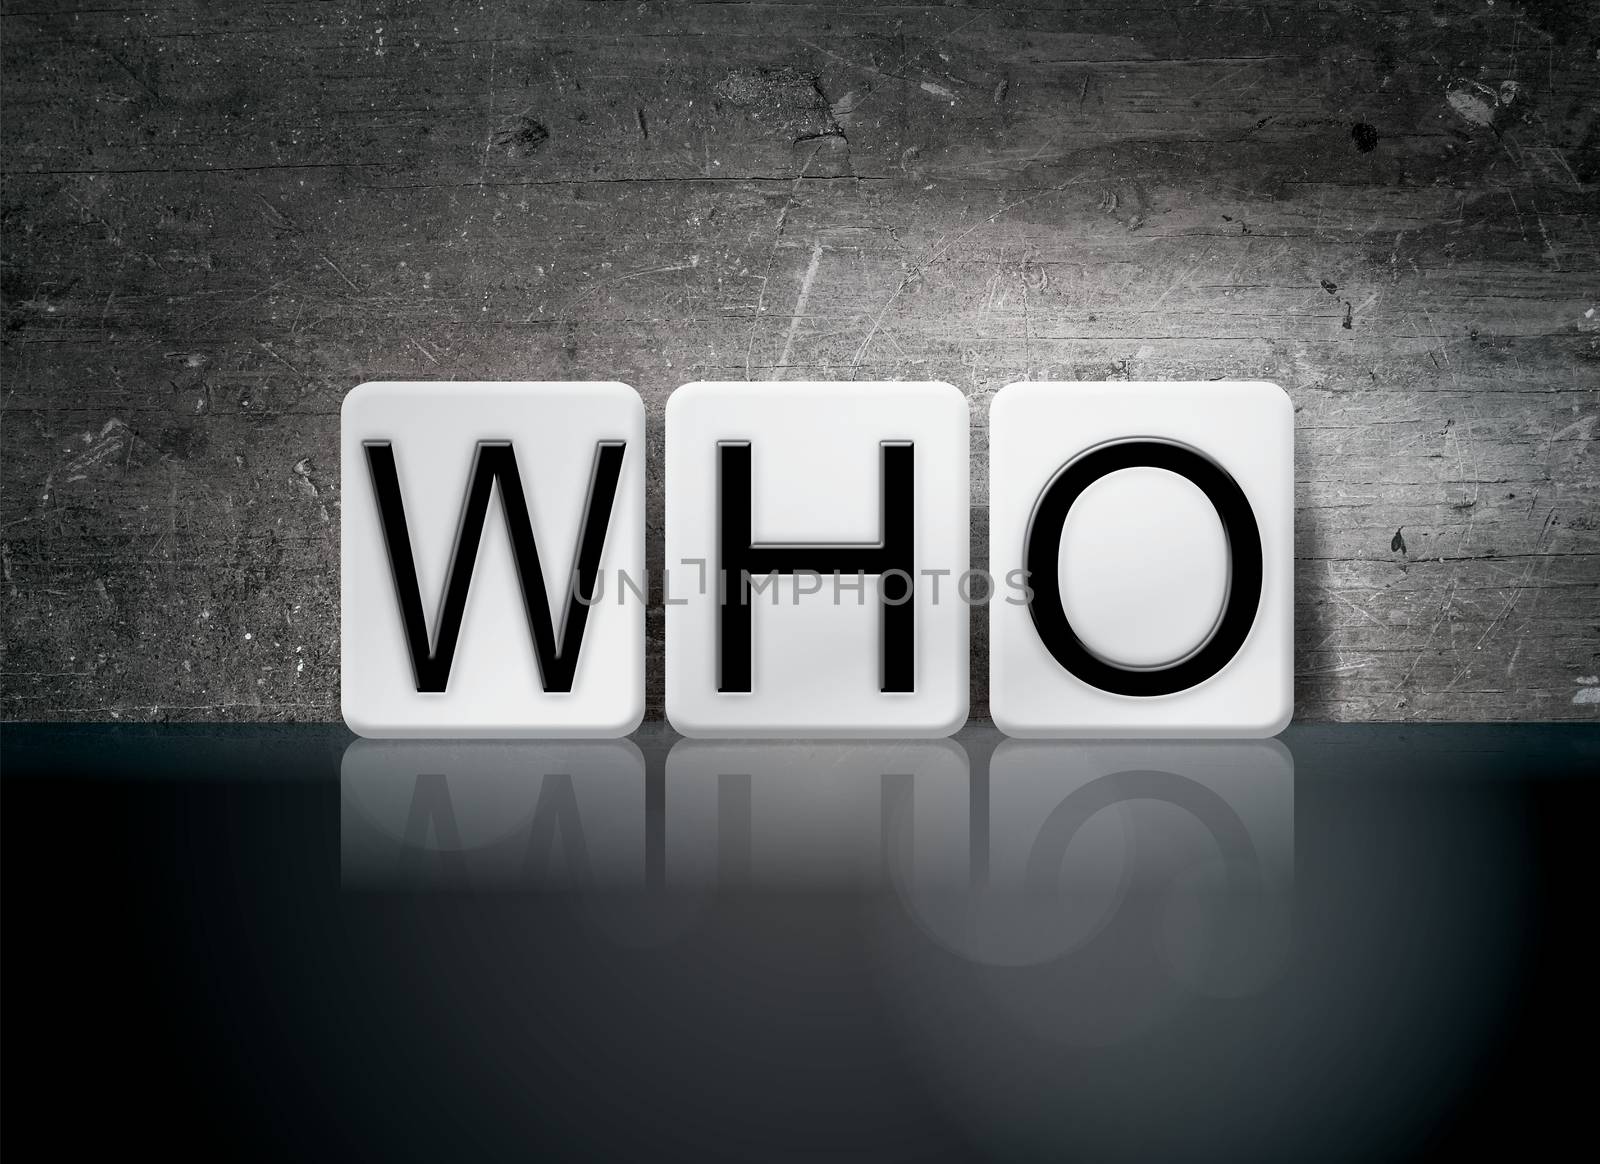 The word "Who" written in white tiles against a dark vintage grunge background.